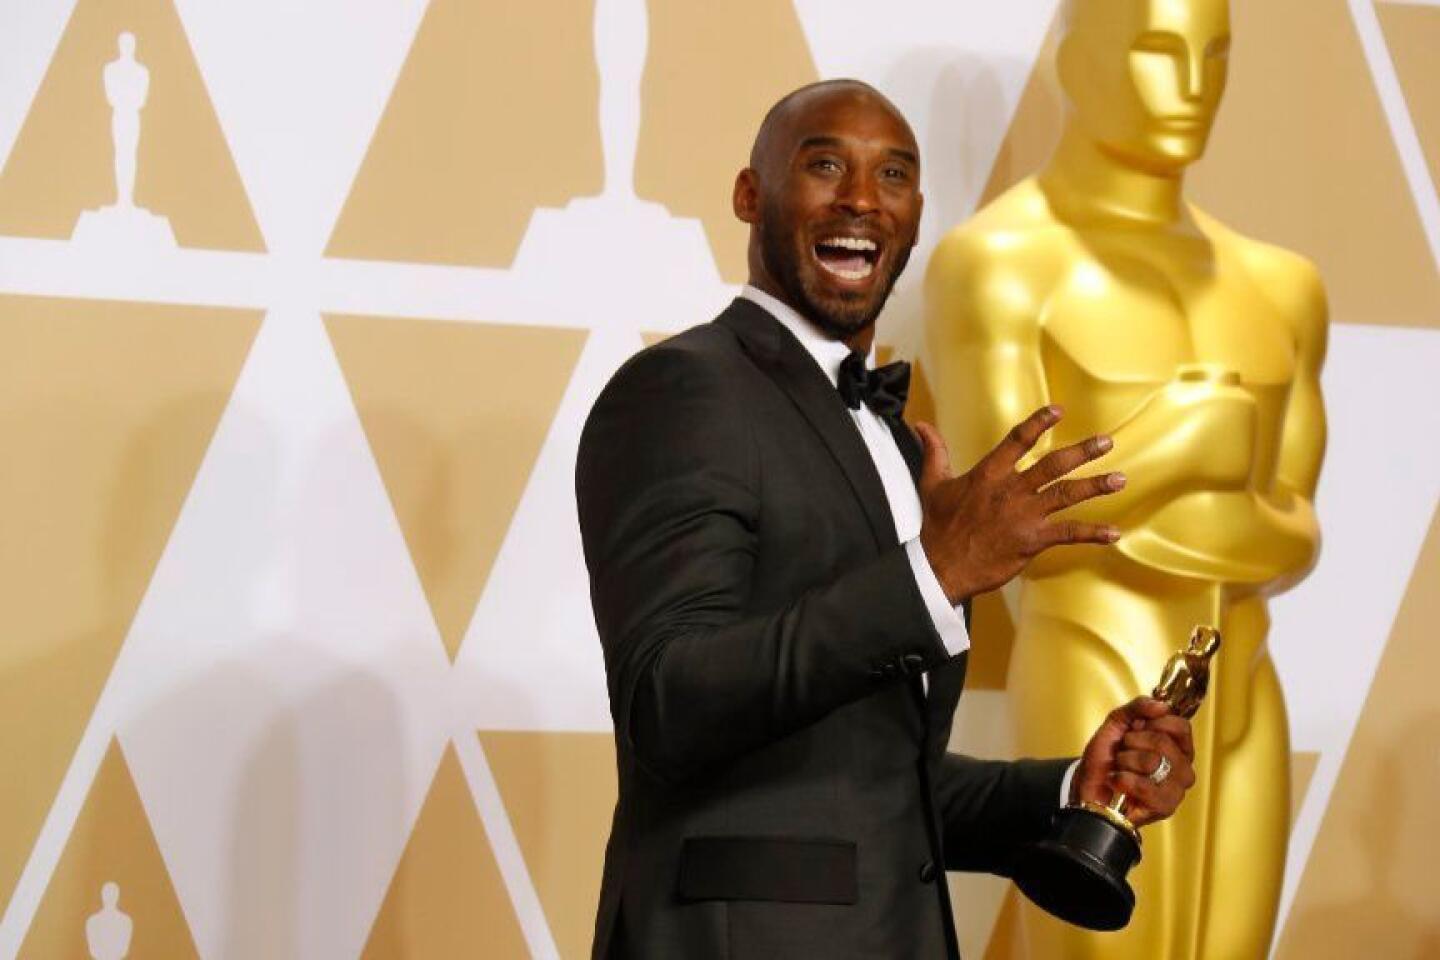 Kobe Bryant, in a tuxedo, holds his Oscar in front of an Oscar statue after winning for "Dear Basketball."